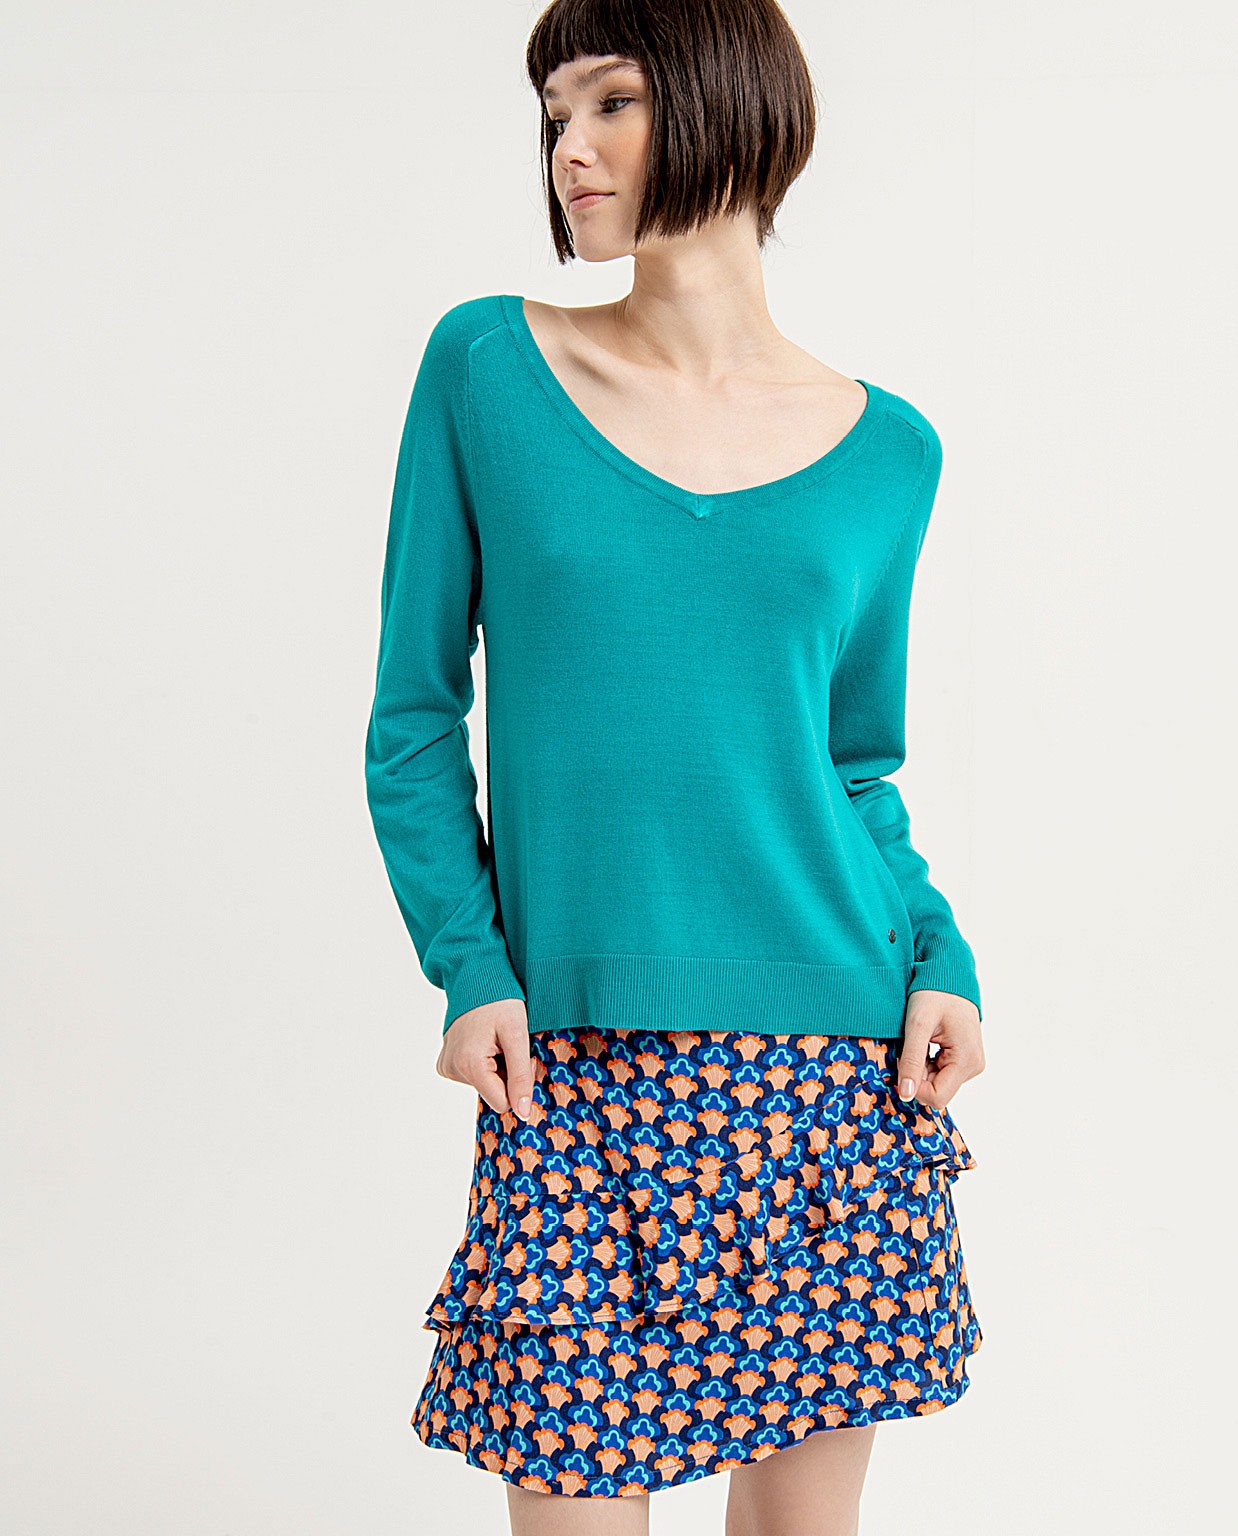 Plain stretch wide V-neck knit jumper with plain r Turquoise